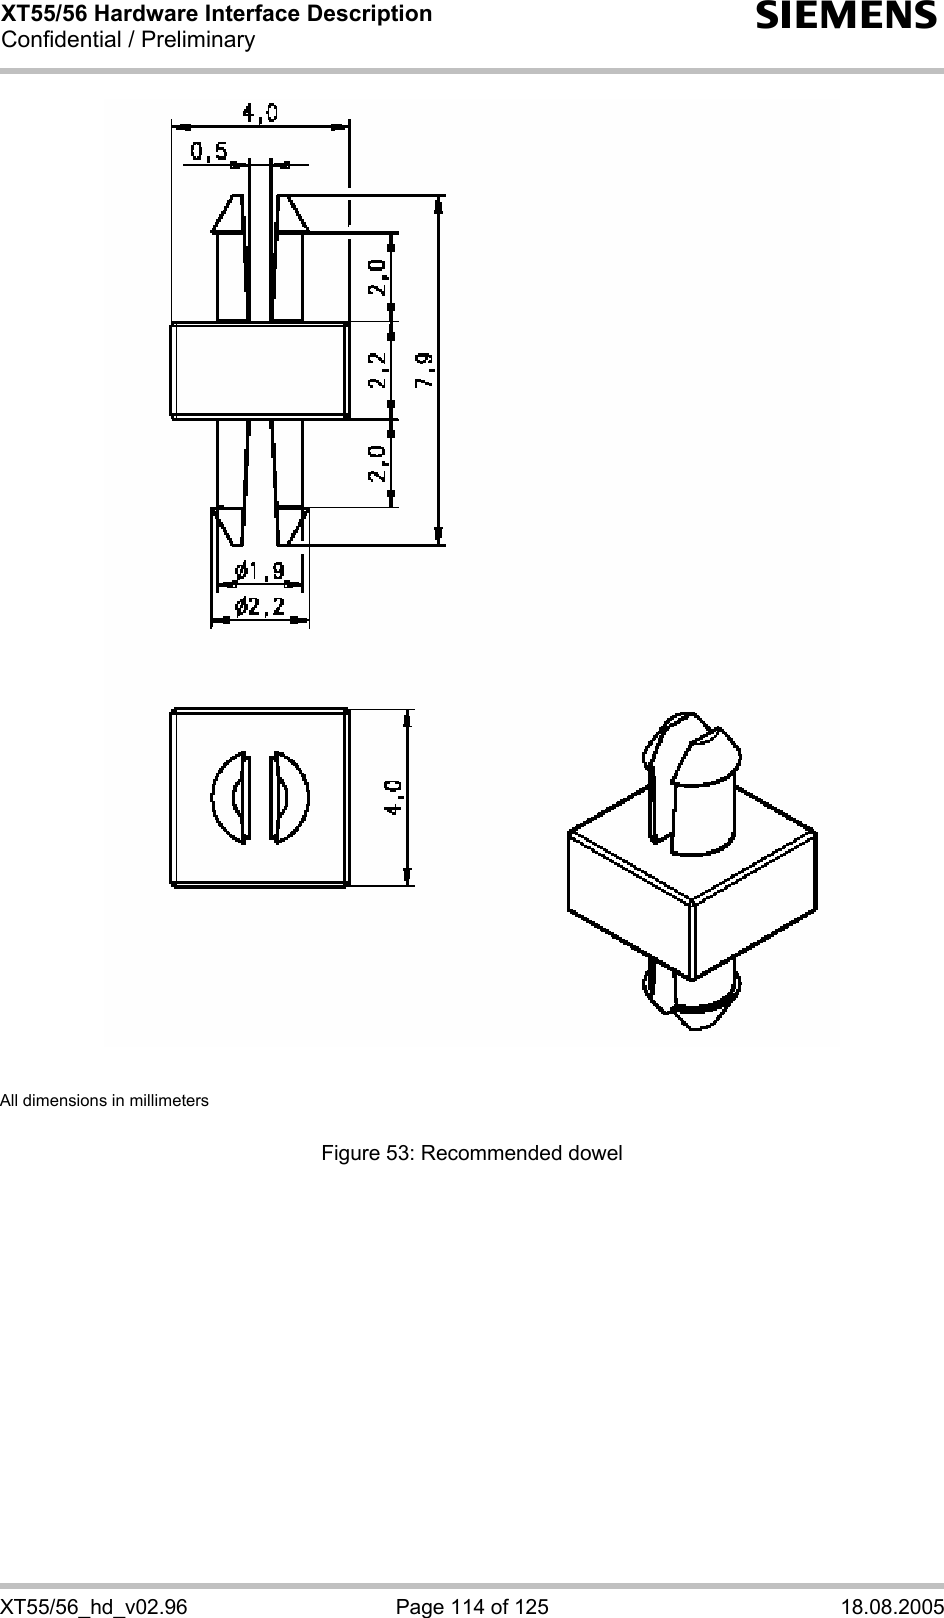 XT55/56 Hardware Interface Description Confidential / Preliminary s XT55/56_hd_v02.96  Page 114 of 125  18.08.2005                                       All dimensions in millimeters   Figure 53: Recommended dowel  